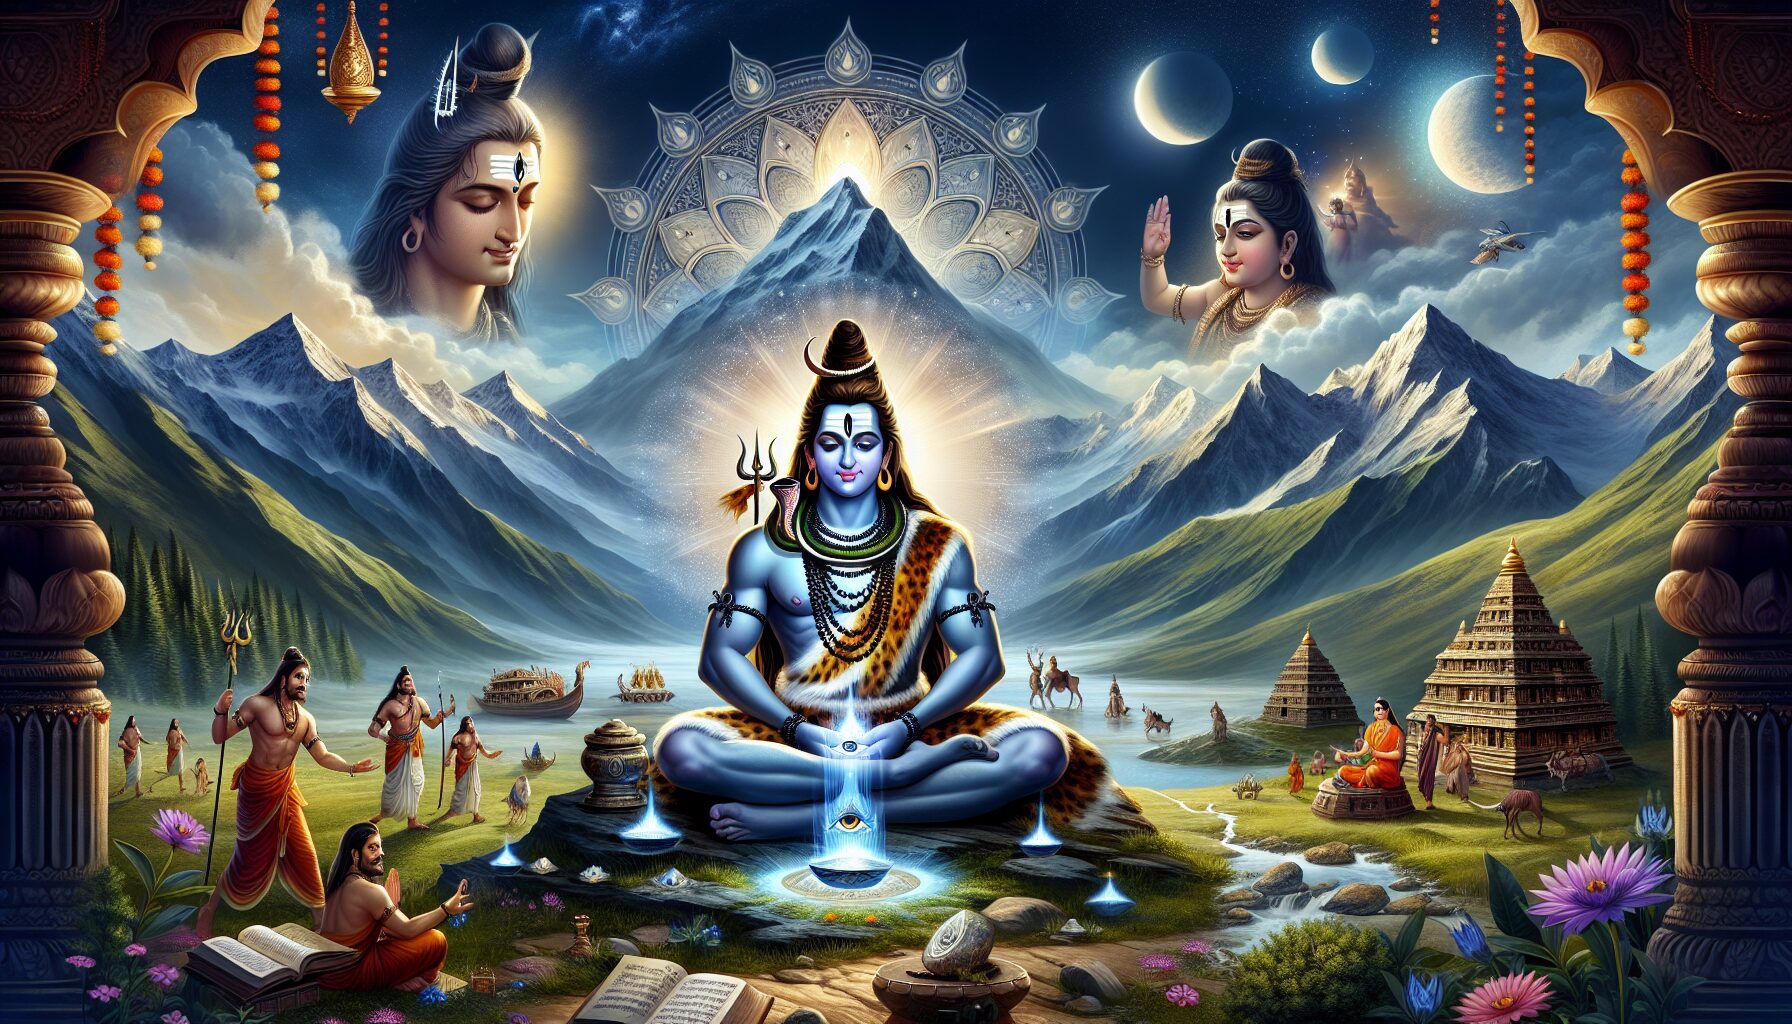 How Did Lord Shiva Get His Third Eye?